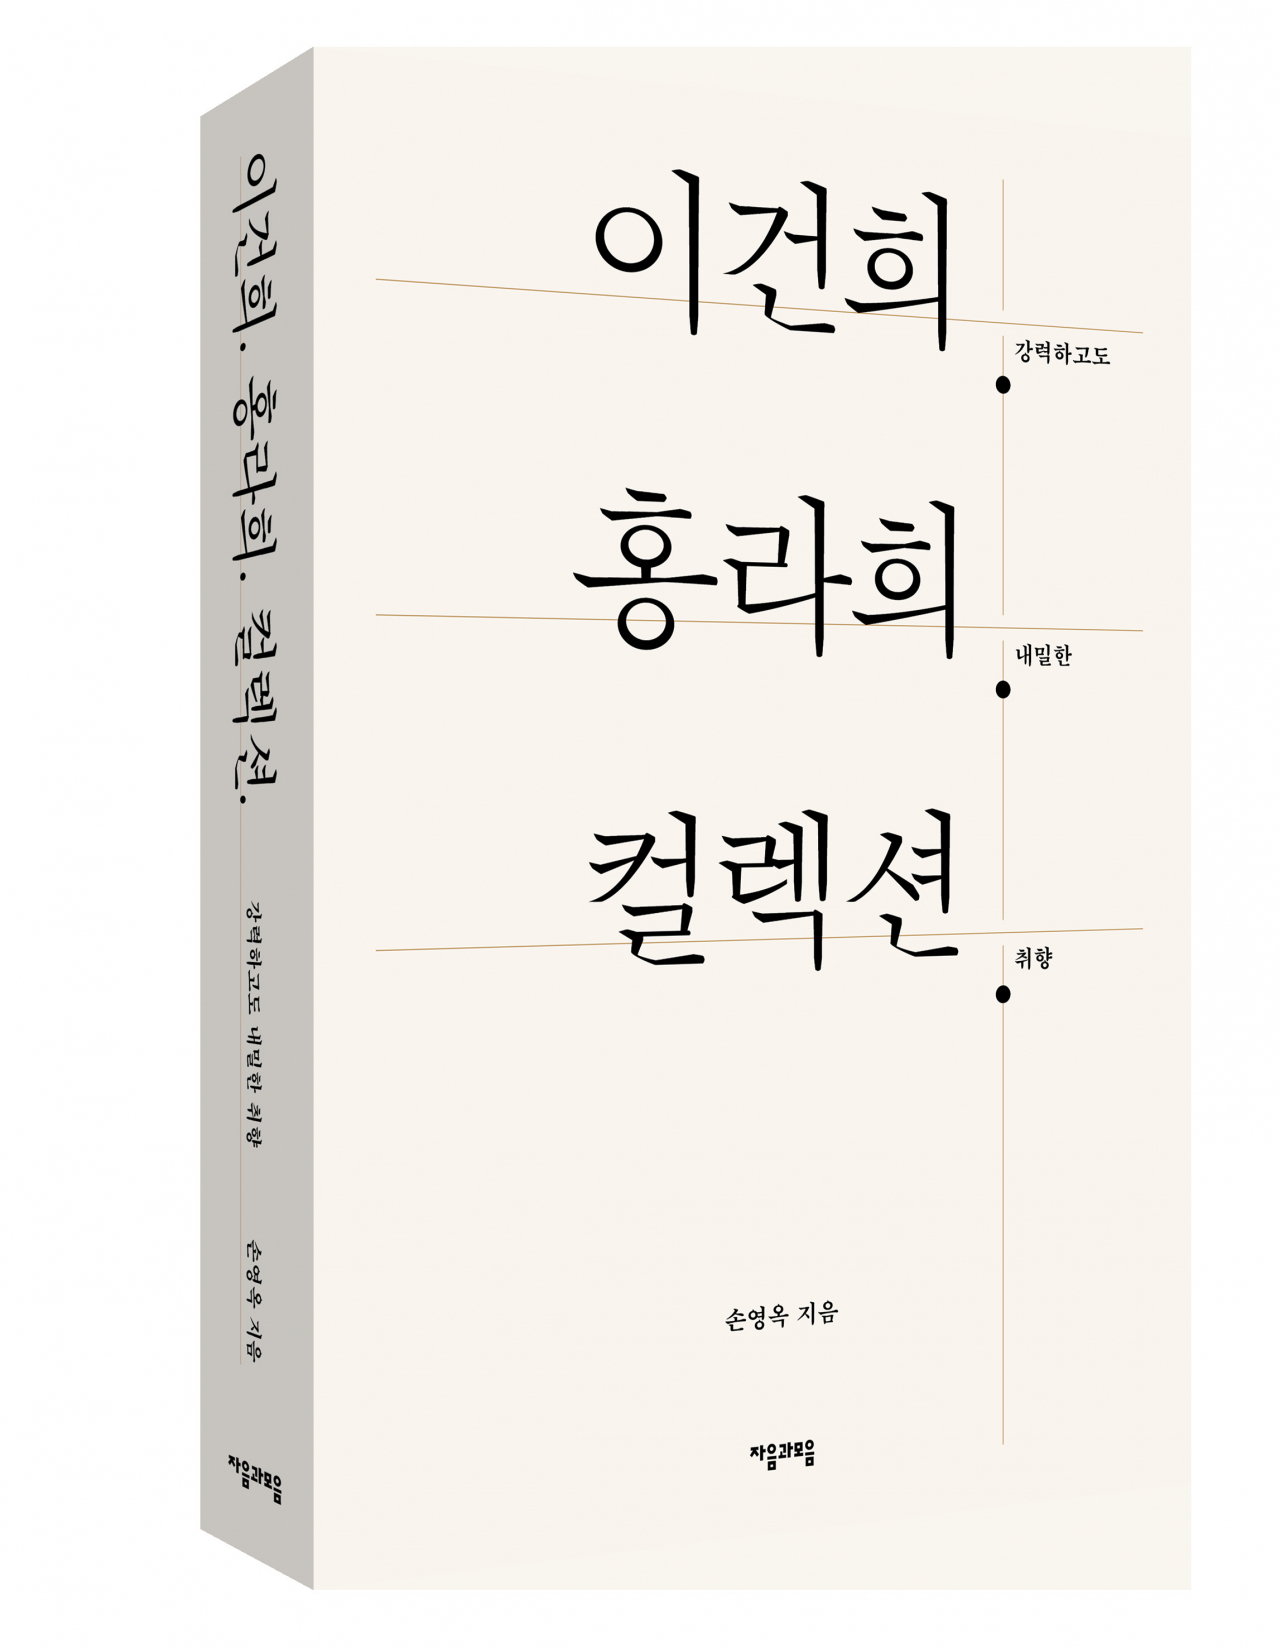 The cover of “Lee Kun-hee. Hong Ra-hee. Collection” (Jaeum&Moeum Publishing Co.)